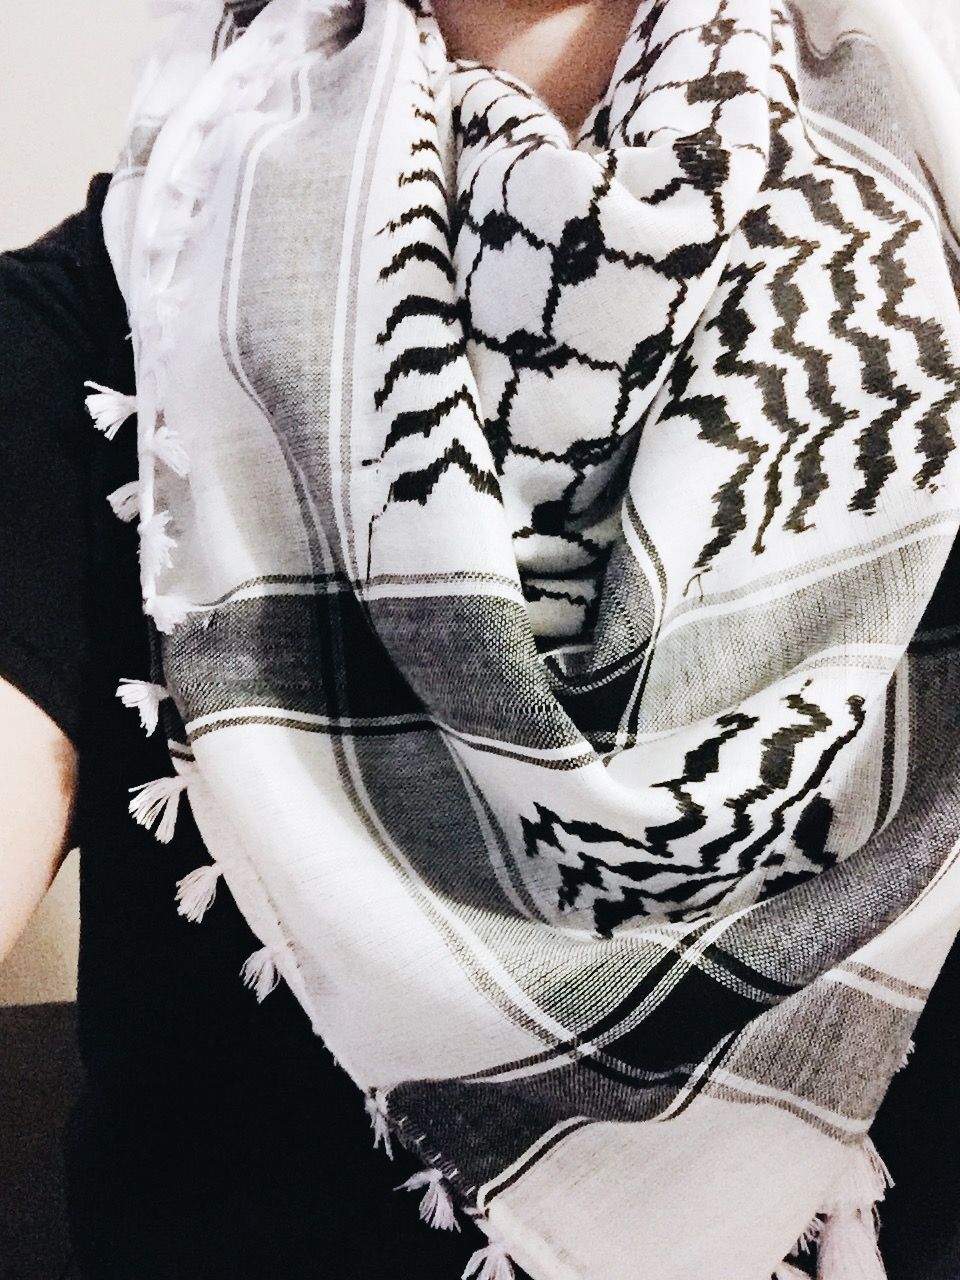 Day 6 Giveaway: Scarf from Israel